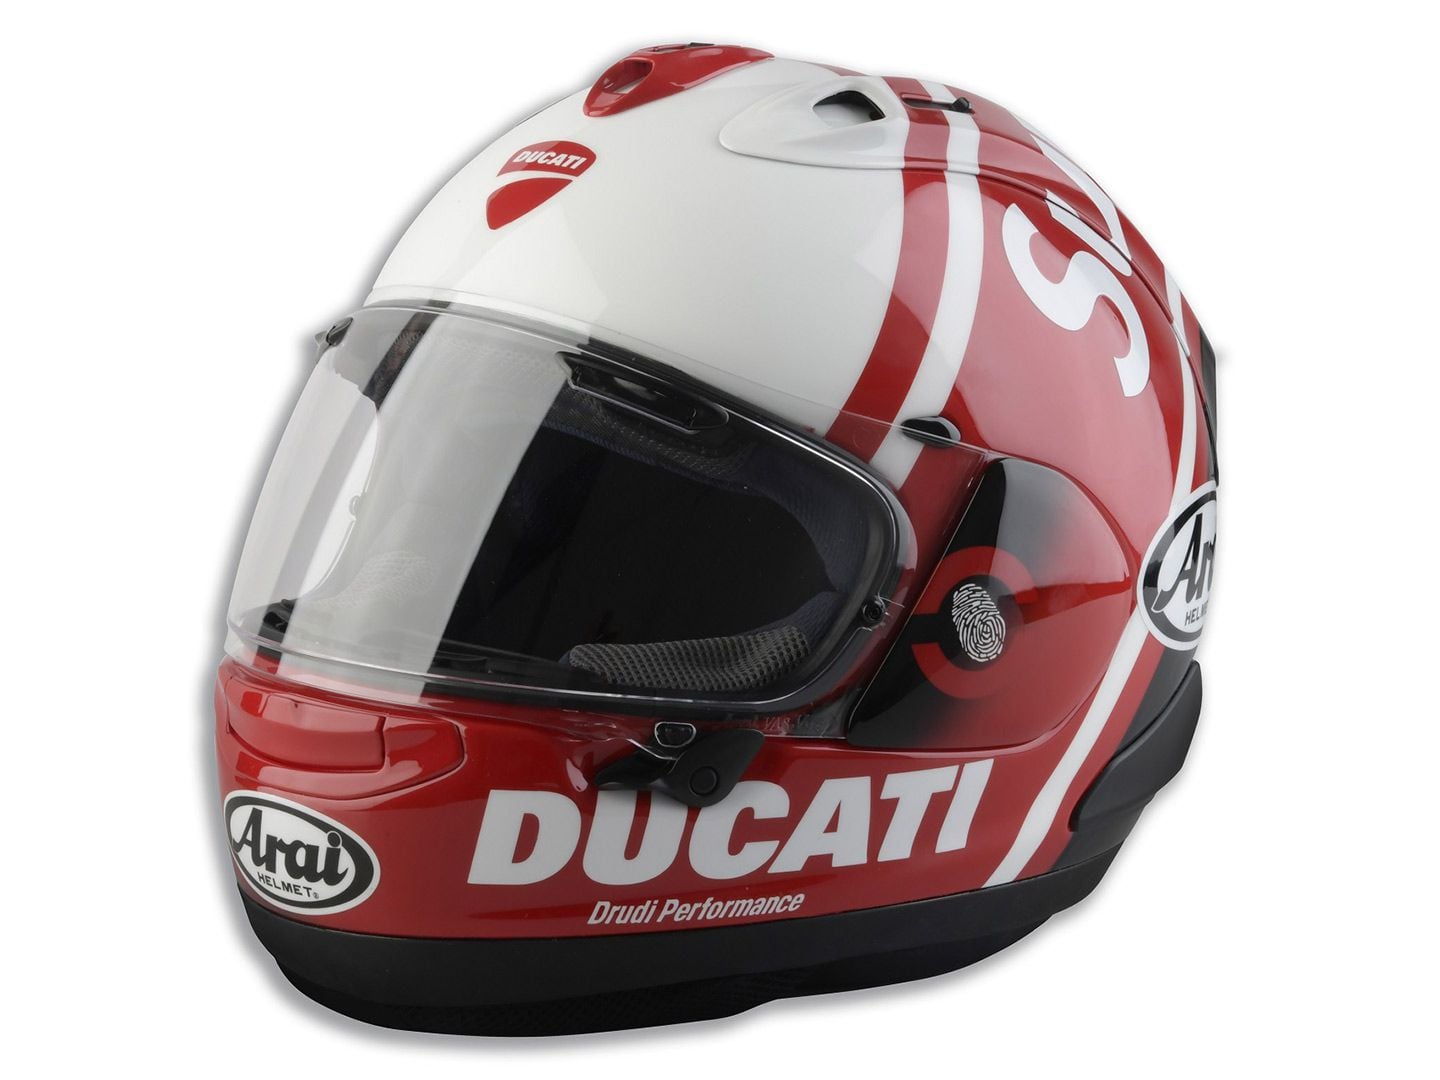 An exclusive Drudi-enhanced racing helmet from Arai is also part of the series.